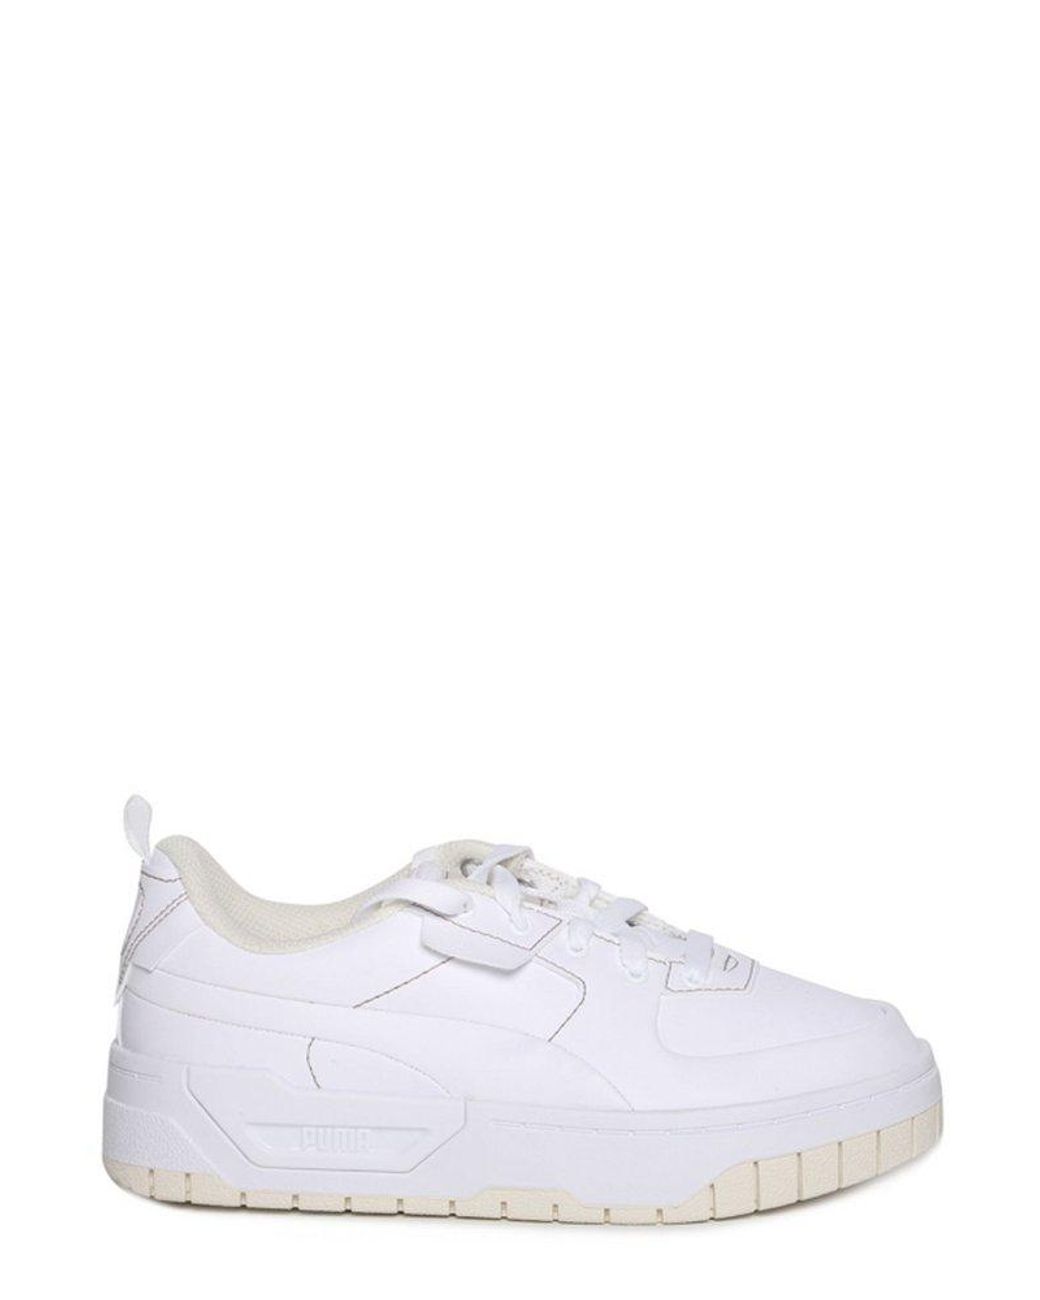 PUMA Cali Dream Infuse Low-top Sneakers in White | Lyst